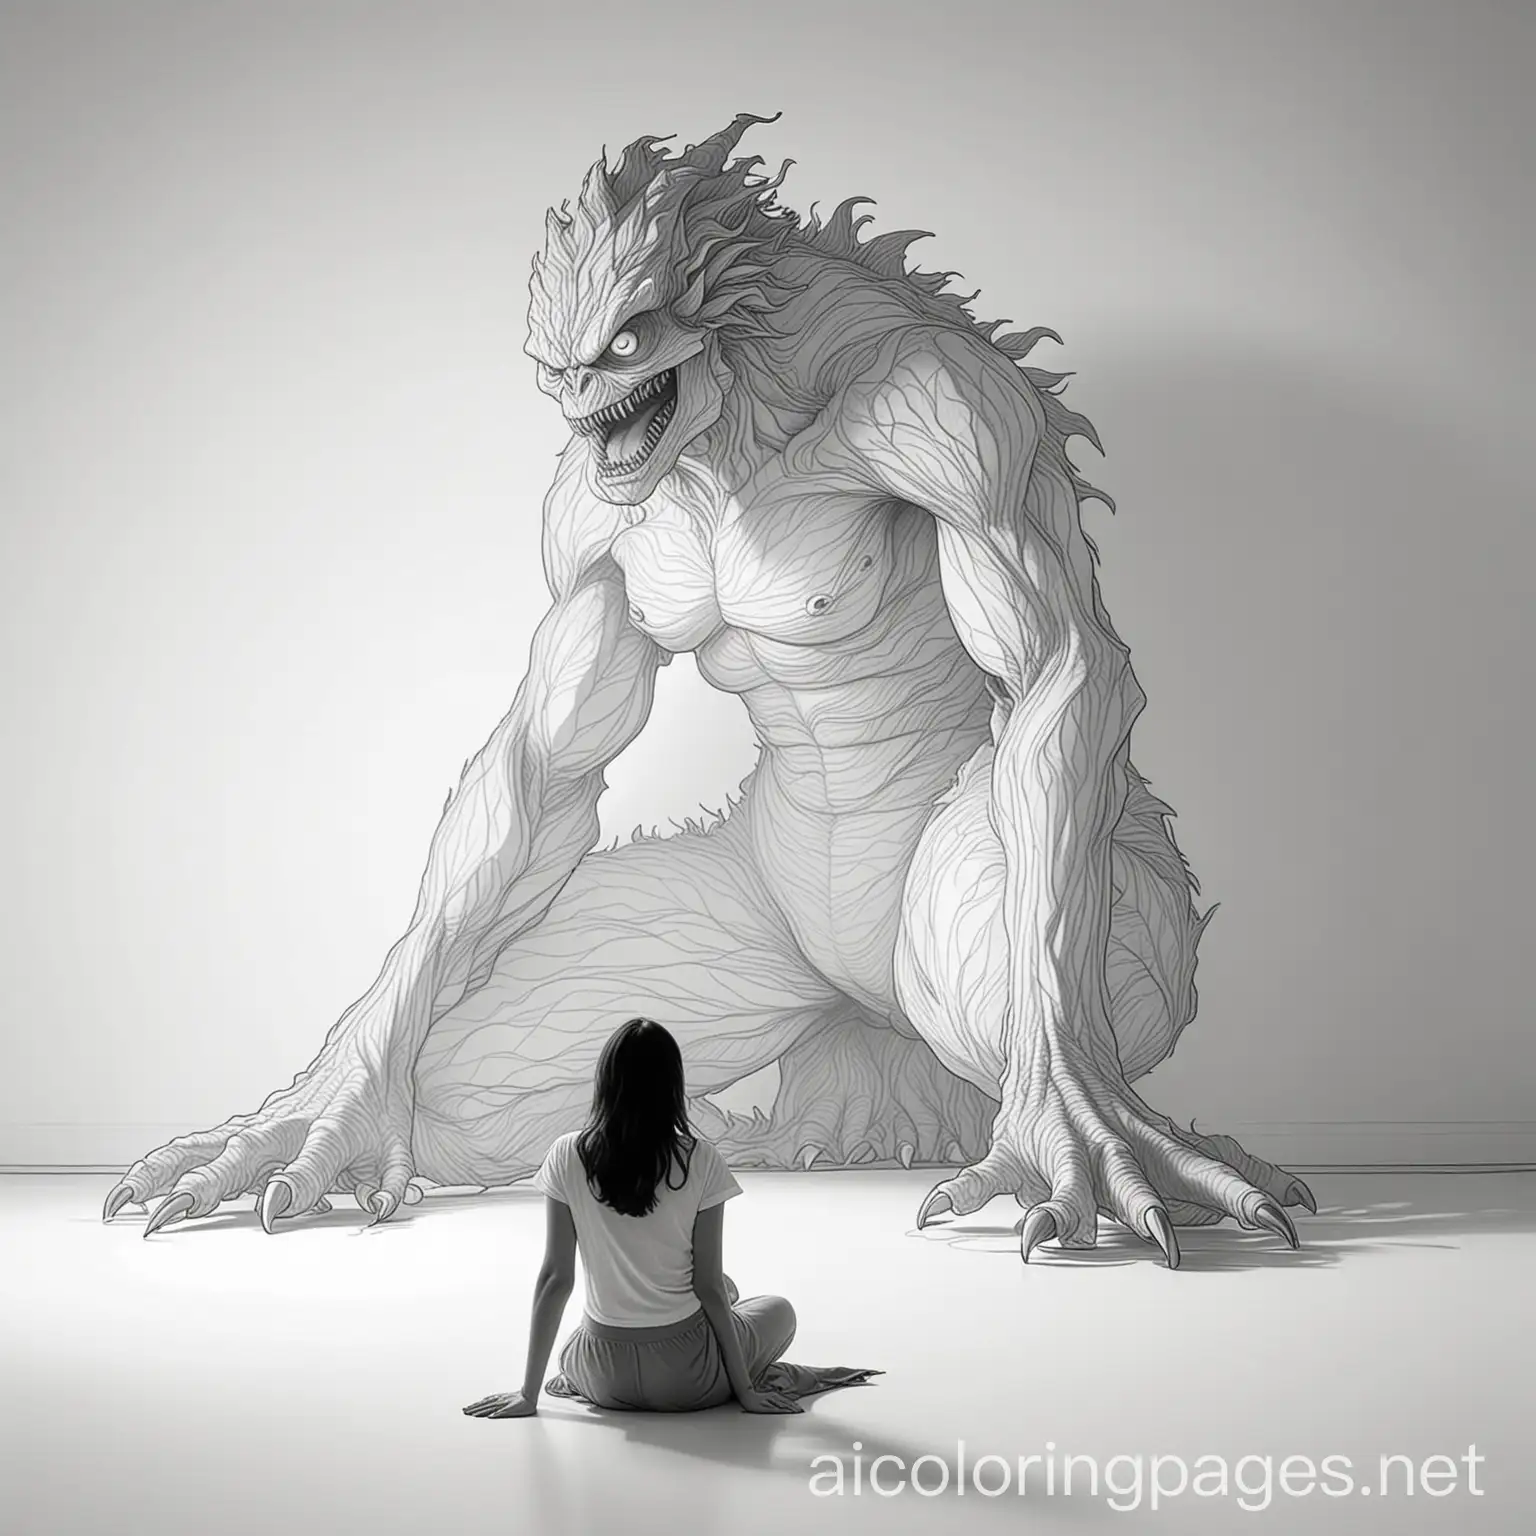 a women sitting on the floor with a large looming monster shadow behind her
, Coloring Page, black and white, line art, white background, Simplicity, Ample White Space. The background of the coloring page is plain white to make it easy for young children to color within the lines. The outlines of all the subjects are easy to distinguish, making it simple for kids to color without too much difficulty